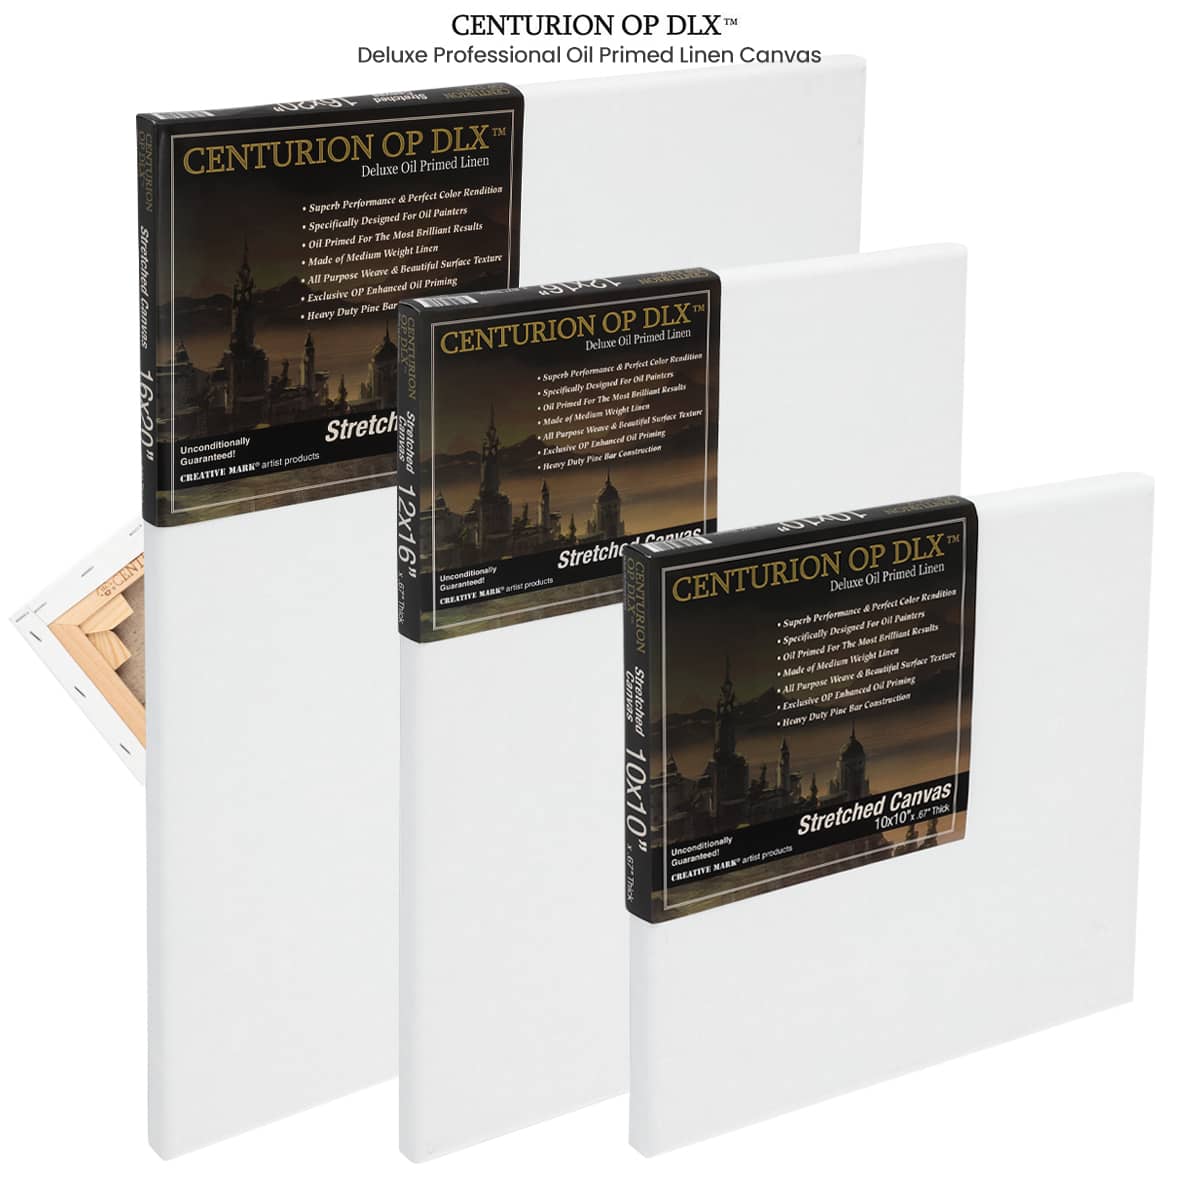 Deluxe Professional Oil Primed Linen Stretched Canvas Centurion (OP DLX)